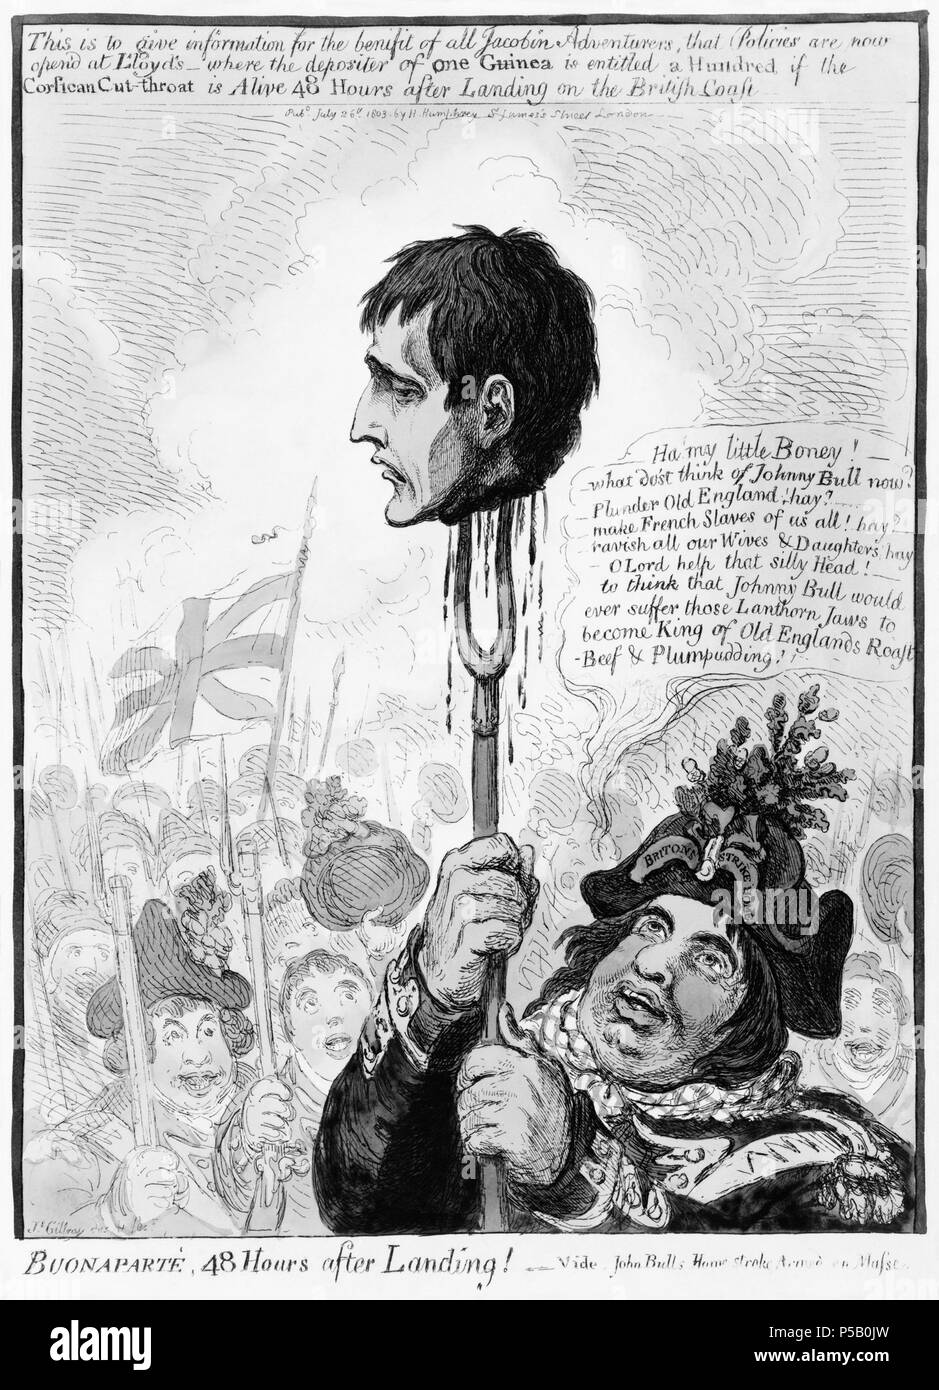 N/A. Caricature of Napoleon, beheaded, in the hypothetical scenario of an invasion of England. Depicts John Bull holding Napoleon's head on a pitchfork. Etching. Text transcriptions: Top  This is to give information for the benefit of all Jacobin Adventurers, that Policies are now offered at Lloyd’s—where the depositor of one Guinea is engitled a hundred if the Corsican Cut-throat is alive 48 Hours after Landing on the British Coast. Middle  Ha’ my little Boney! What dost think of Johnny Bull now Plunder old England: hay Make French Slaves of us all! Hay Ravish all our Wives & Daughters; hay O Stock Photo